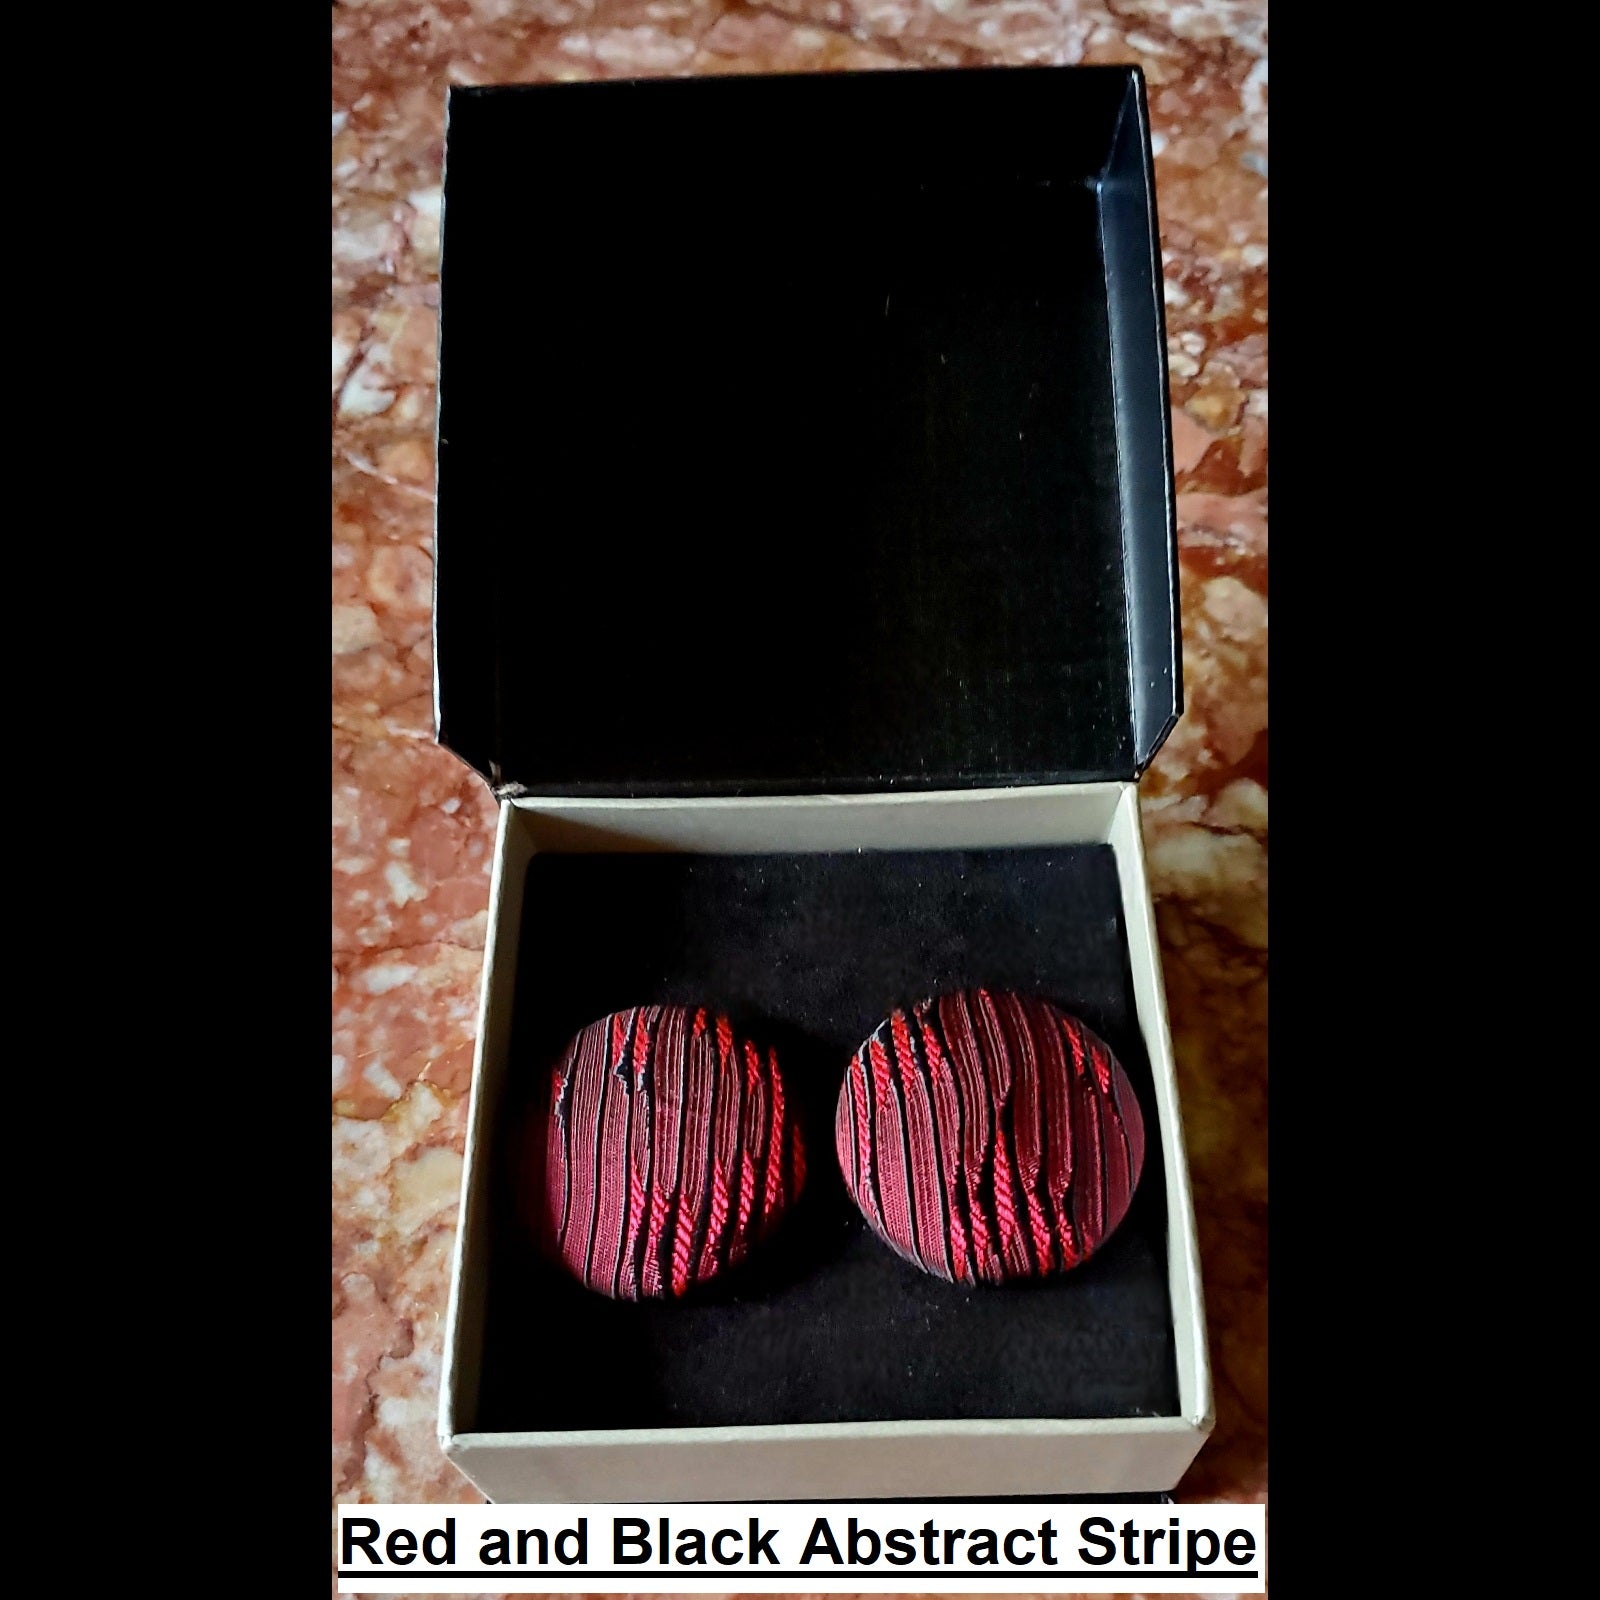 Red and black abstract stripe print button earrings in jewelry box